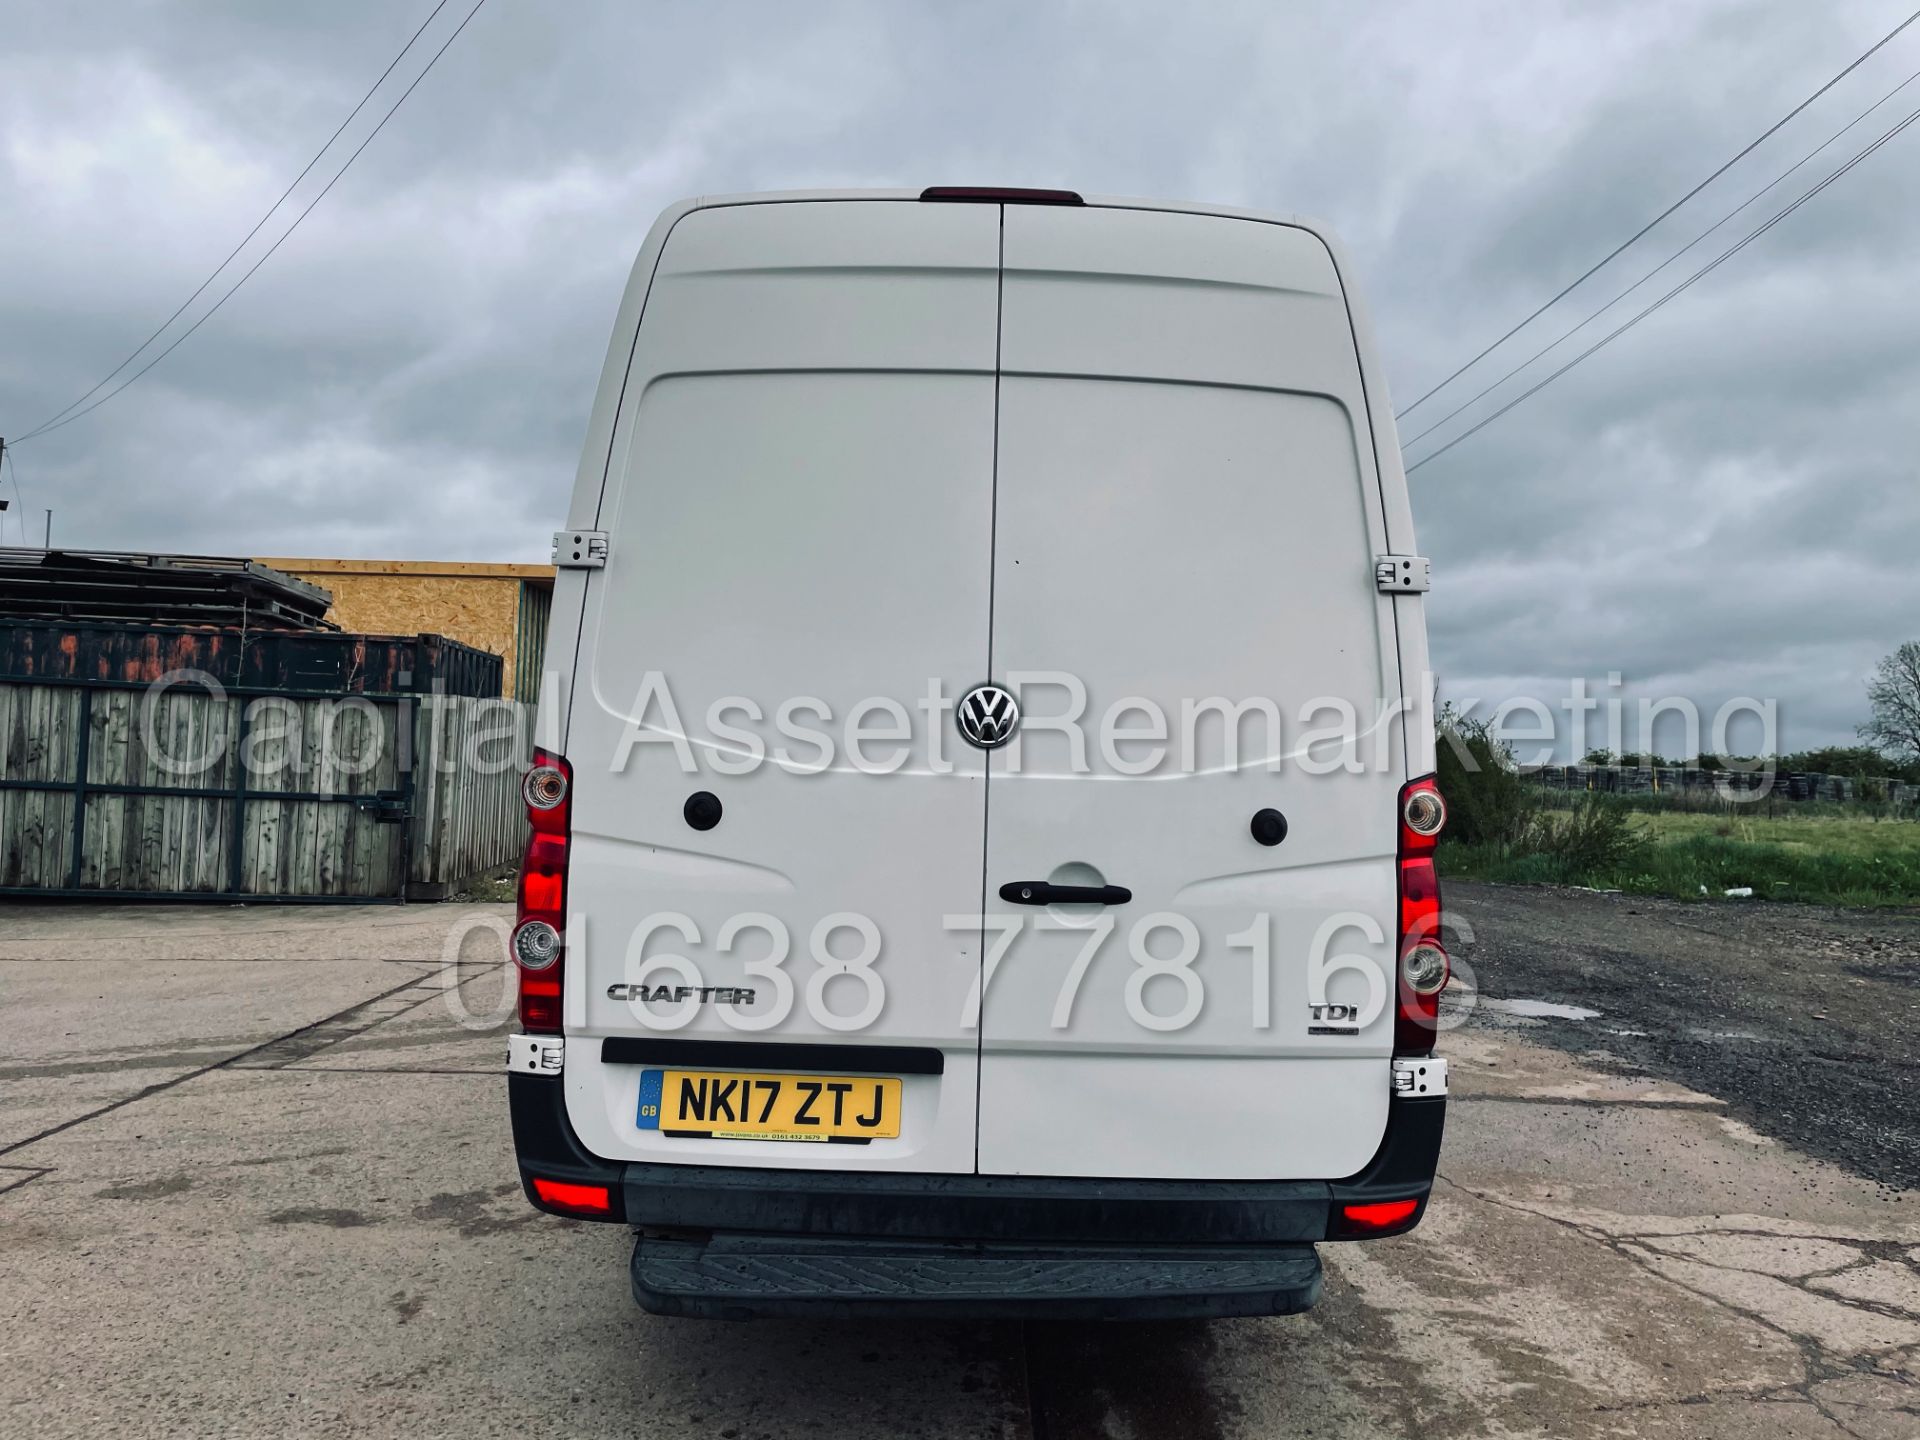 (On Sale) VOLKSWAGEN CRAFTER *LWB HI-ROOF* (2017 - EURO 6) '2.0 TDI BMT - 6 SPEED' *CRUISE CONTROL* - Image 11 of 39